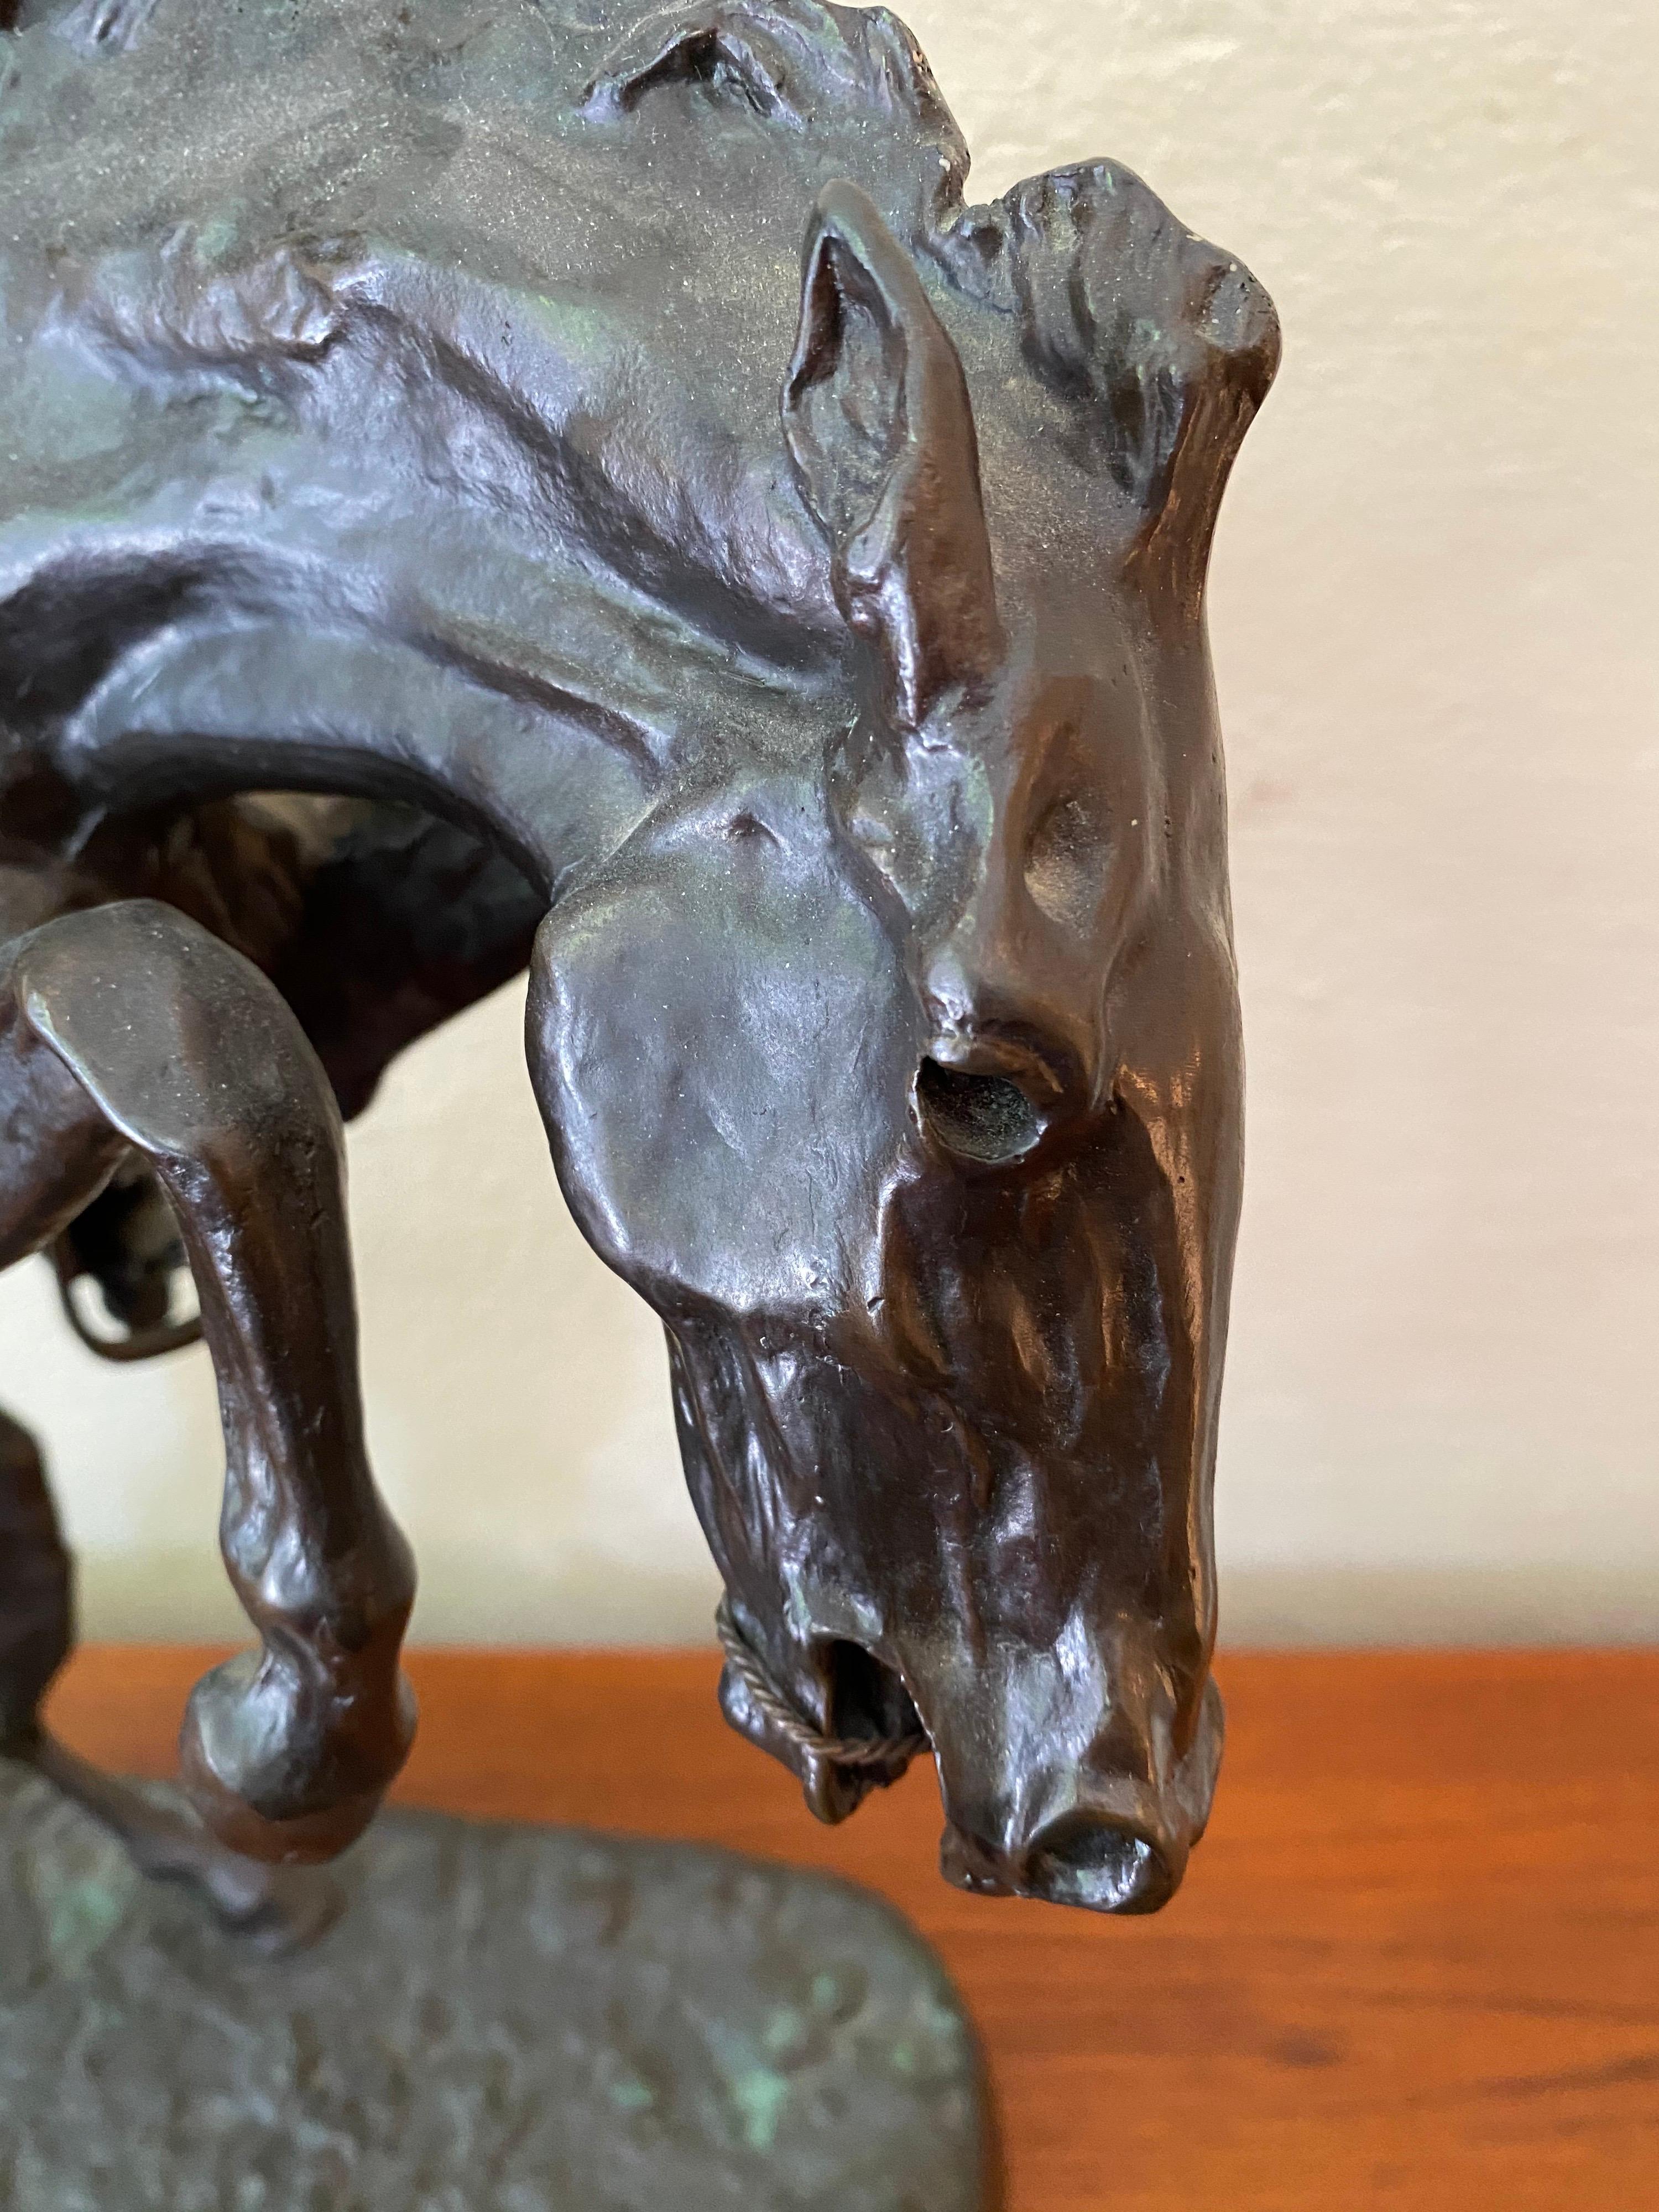 American re-strike of remington's most iconic sculpture, bronco buster! Great size and patina. Casting dates from the 1940s or 1950s and was purchased from the Philadelphia Gallery David and David in the Rittenhouse square area about 15-20 years